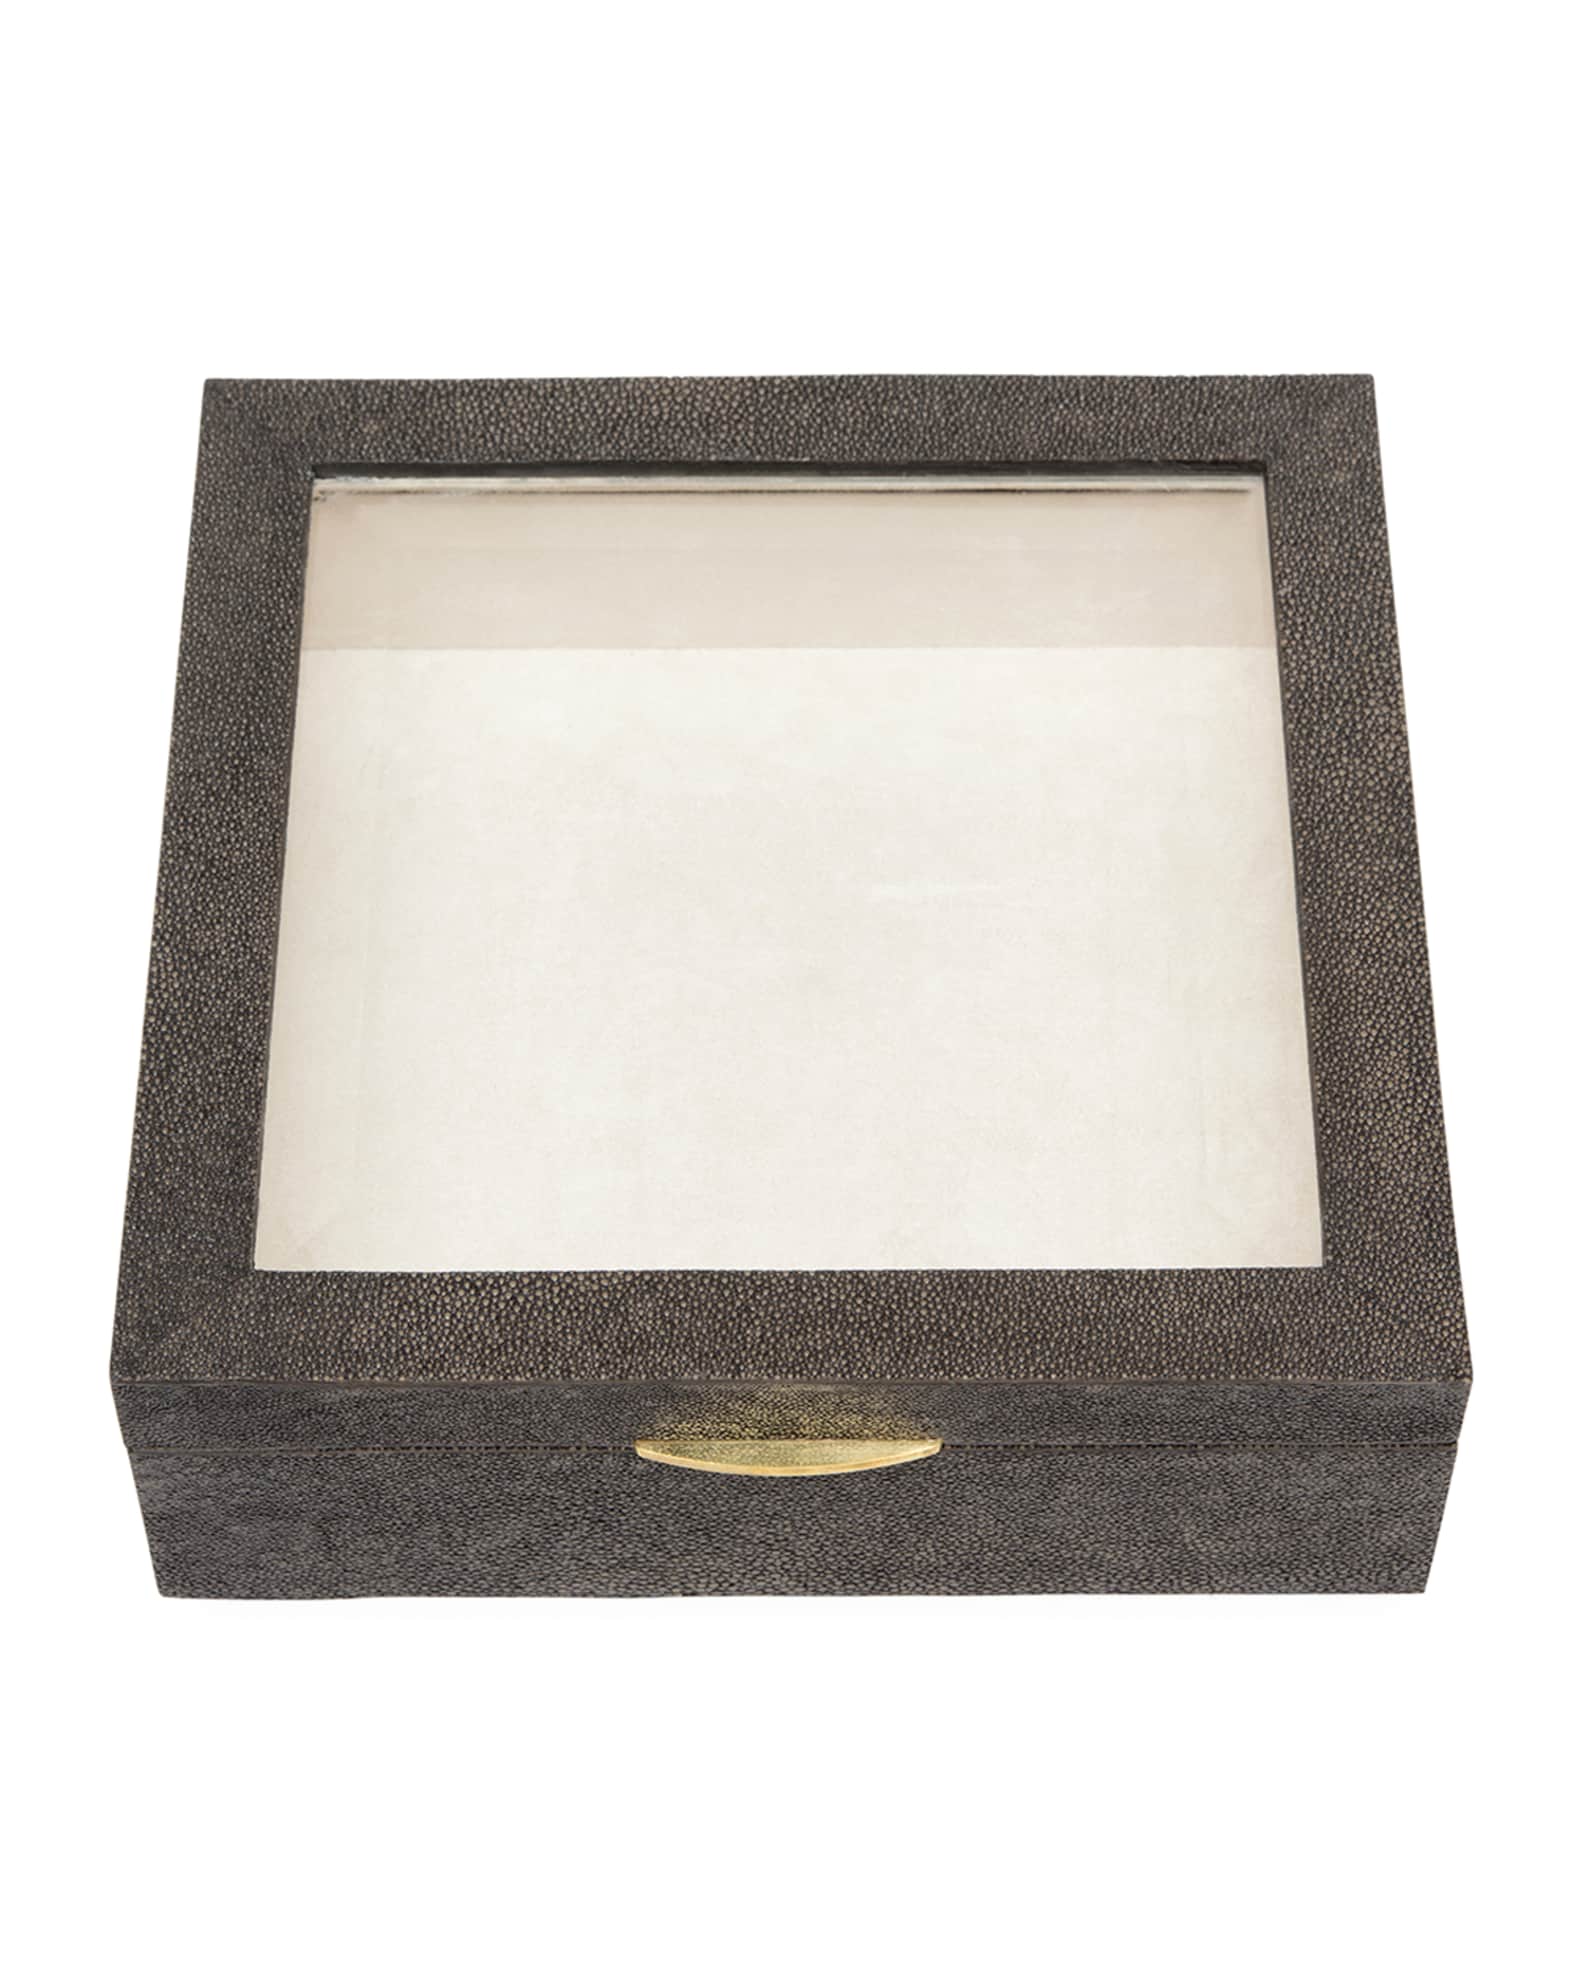 Pigeon and Poodle Henlow Square Faux-Shagreen Display Box